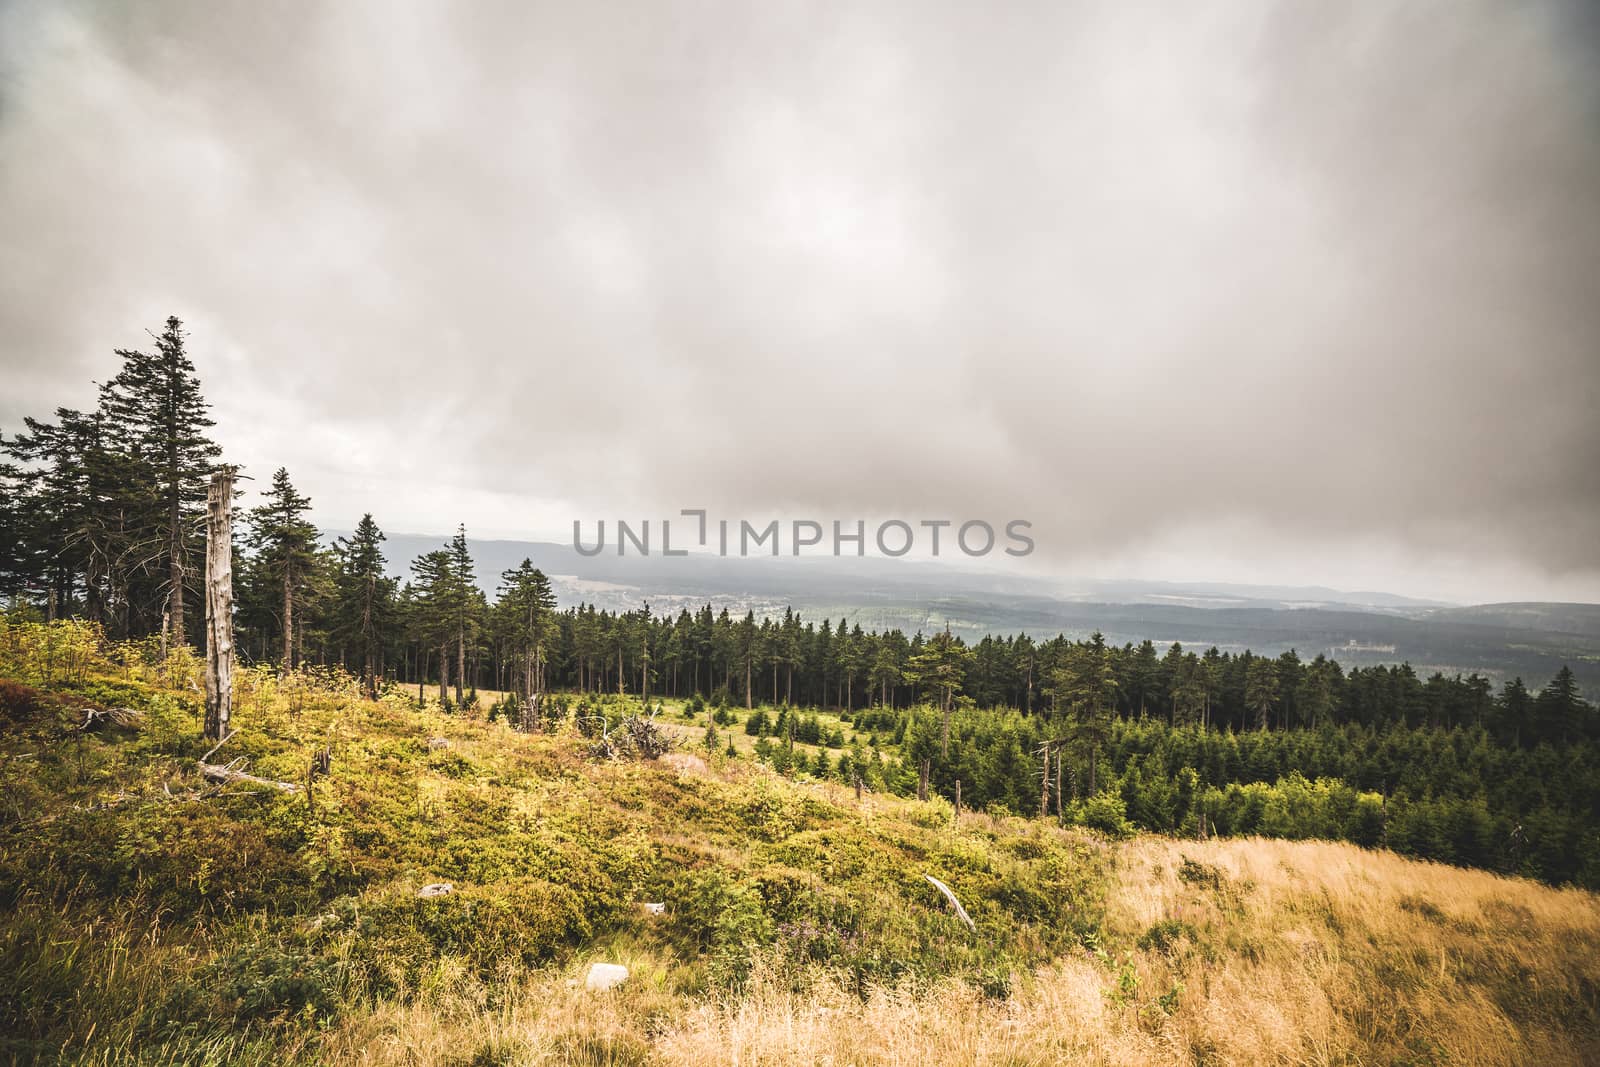 Pine tree forest on a hillside in misty cloudy weather with a large grass area